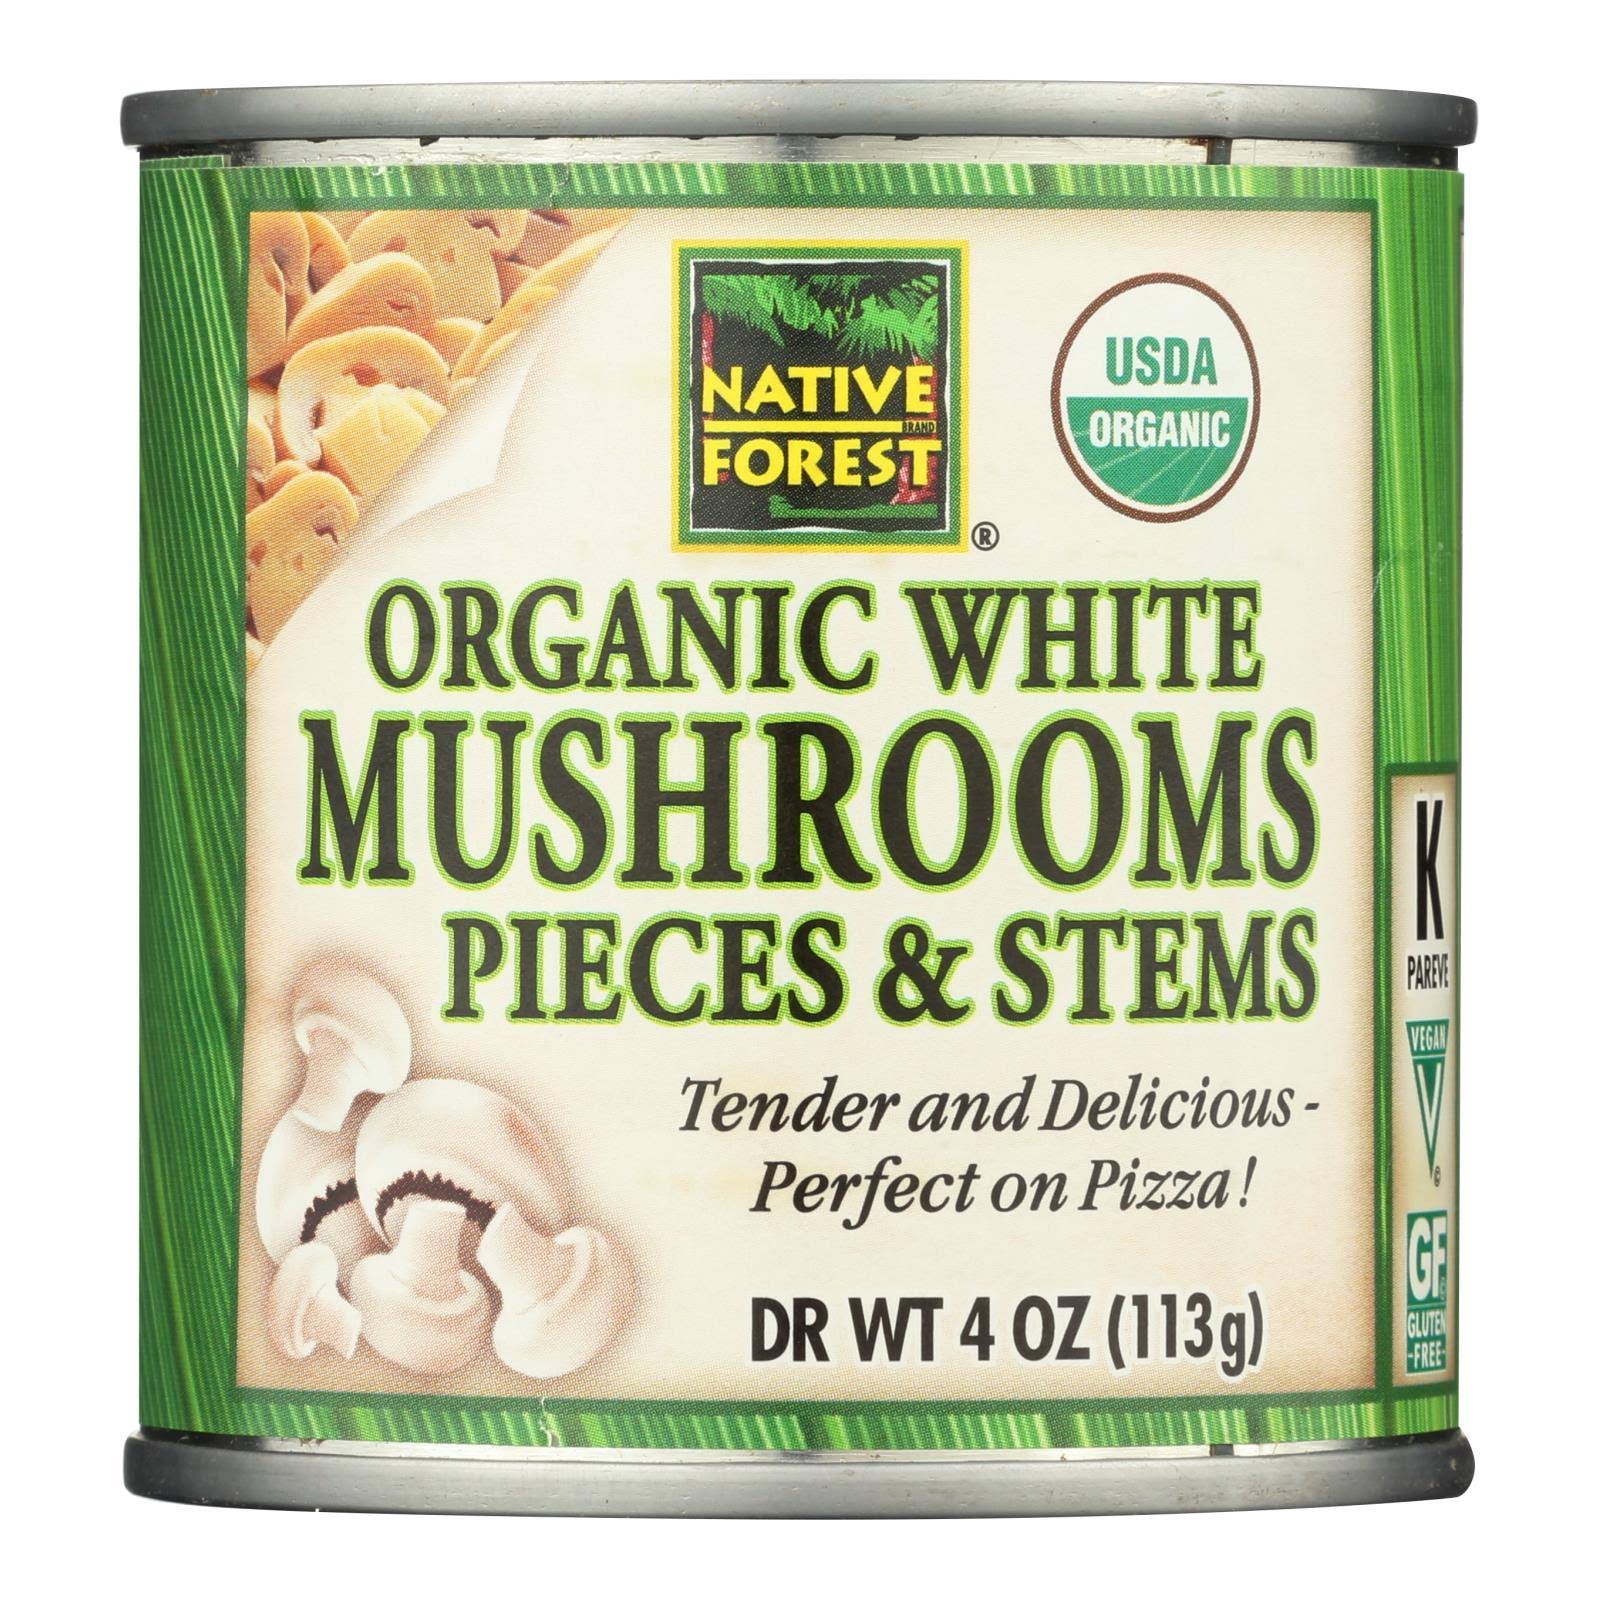 Native Forest Organic Mushrooms - Pieces and Stems, 7oz